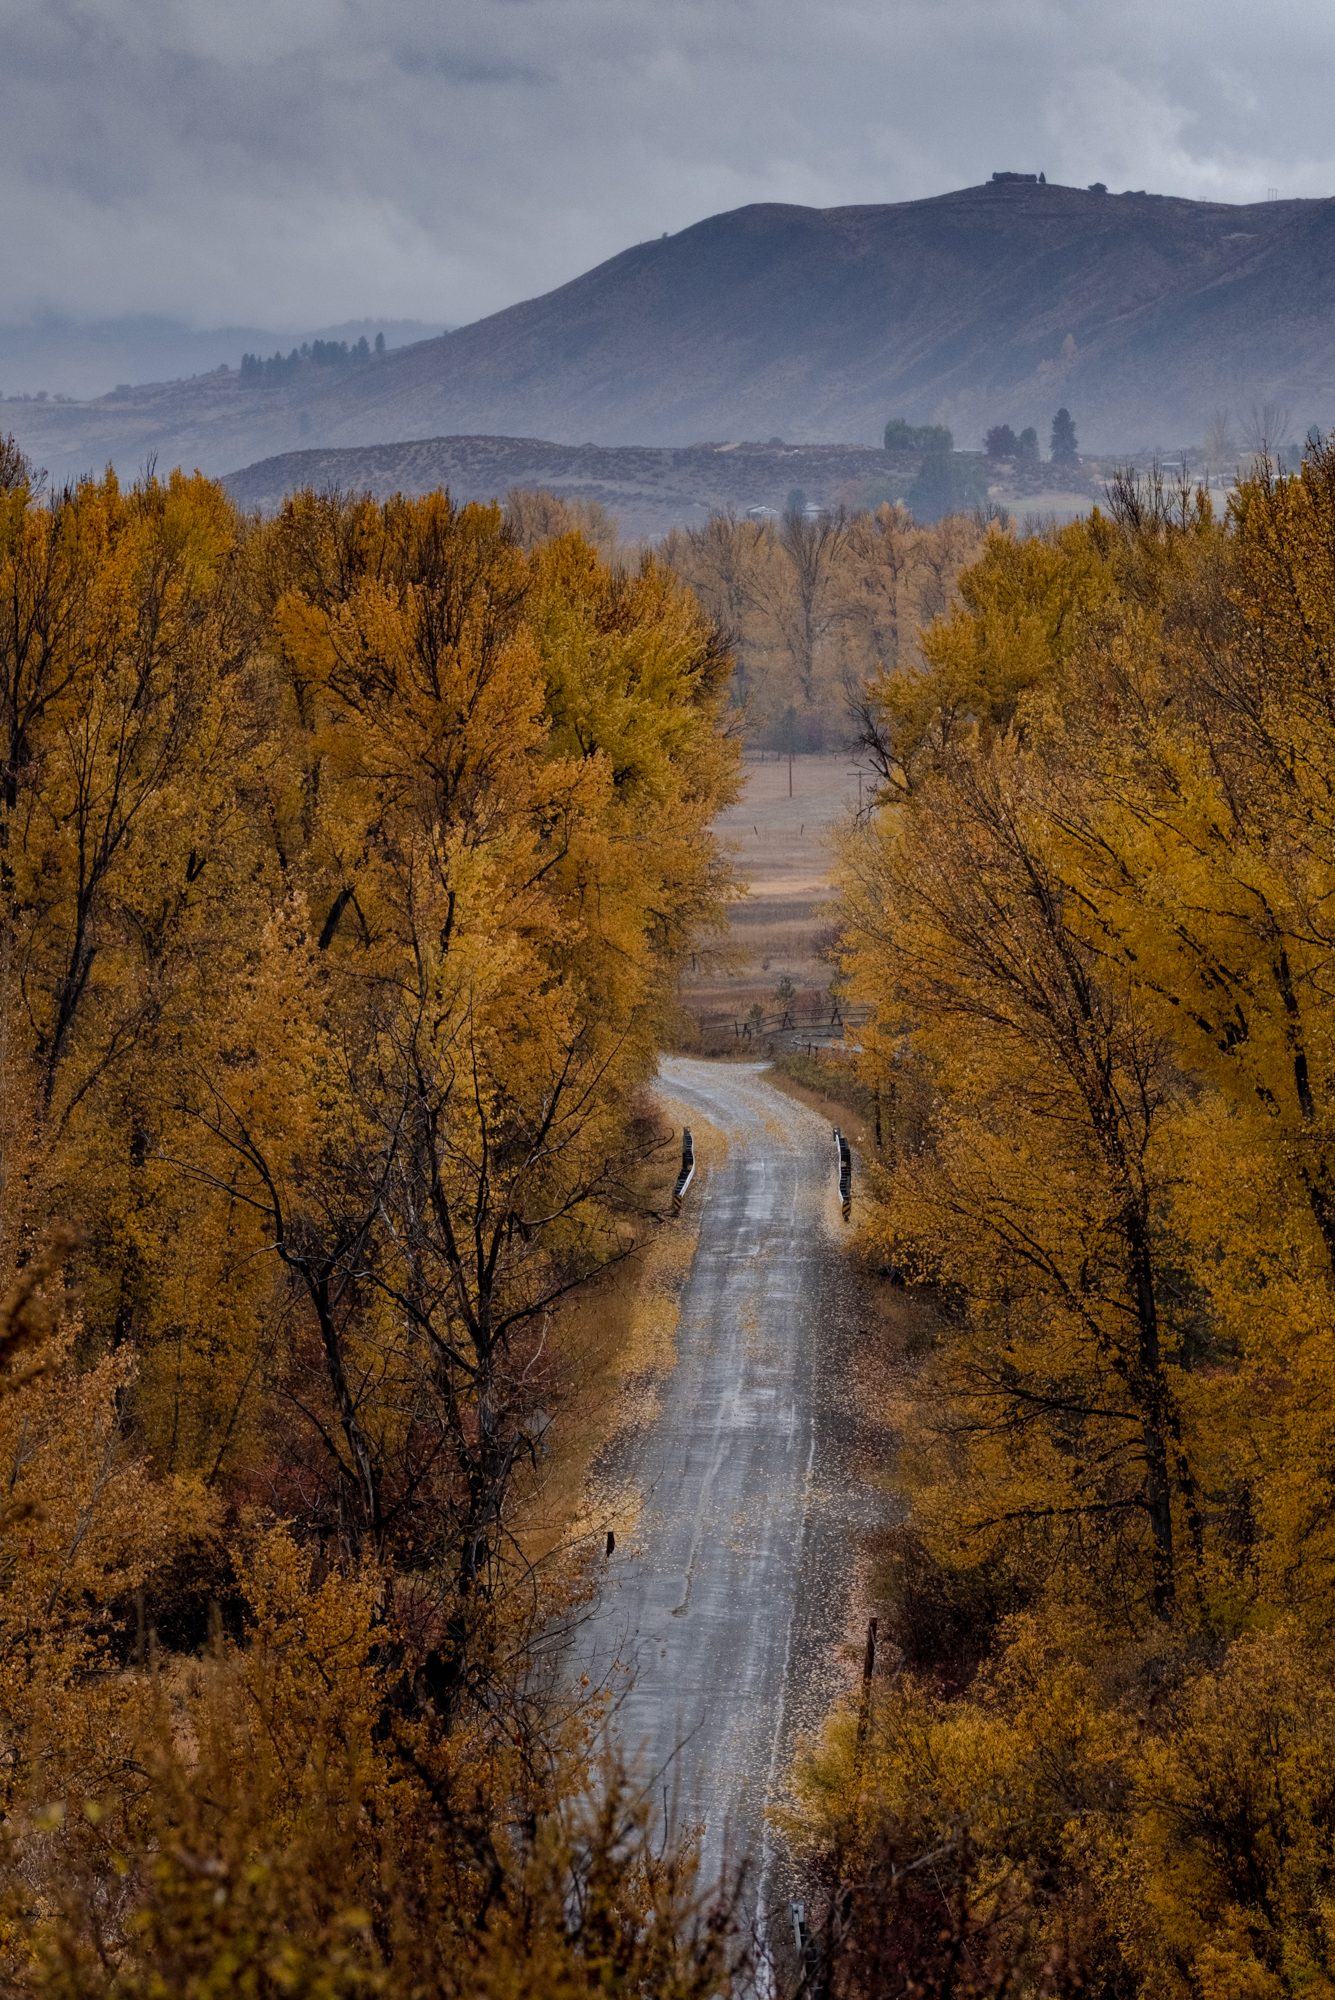 changing yellow leaves with cloudy skies in north central Washington state